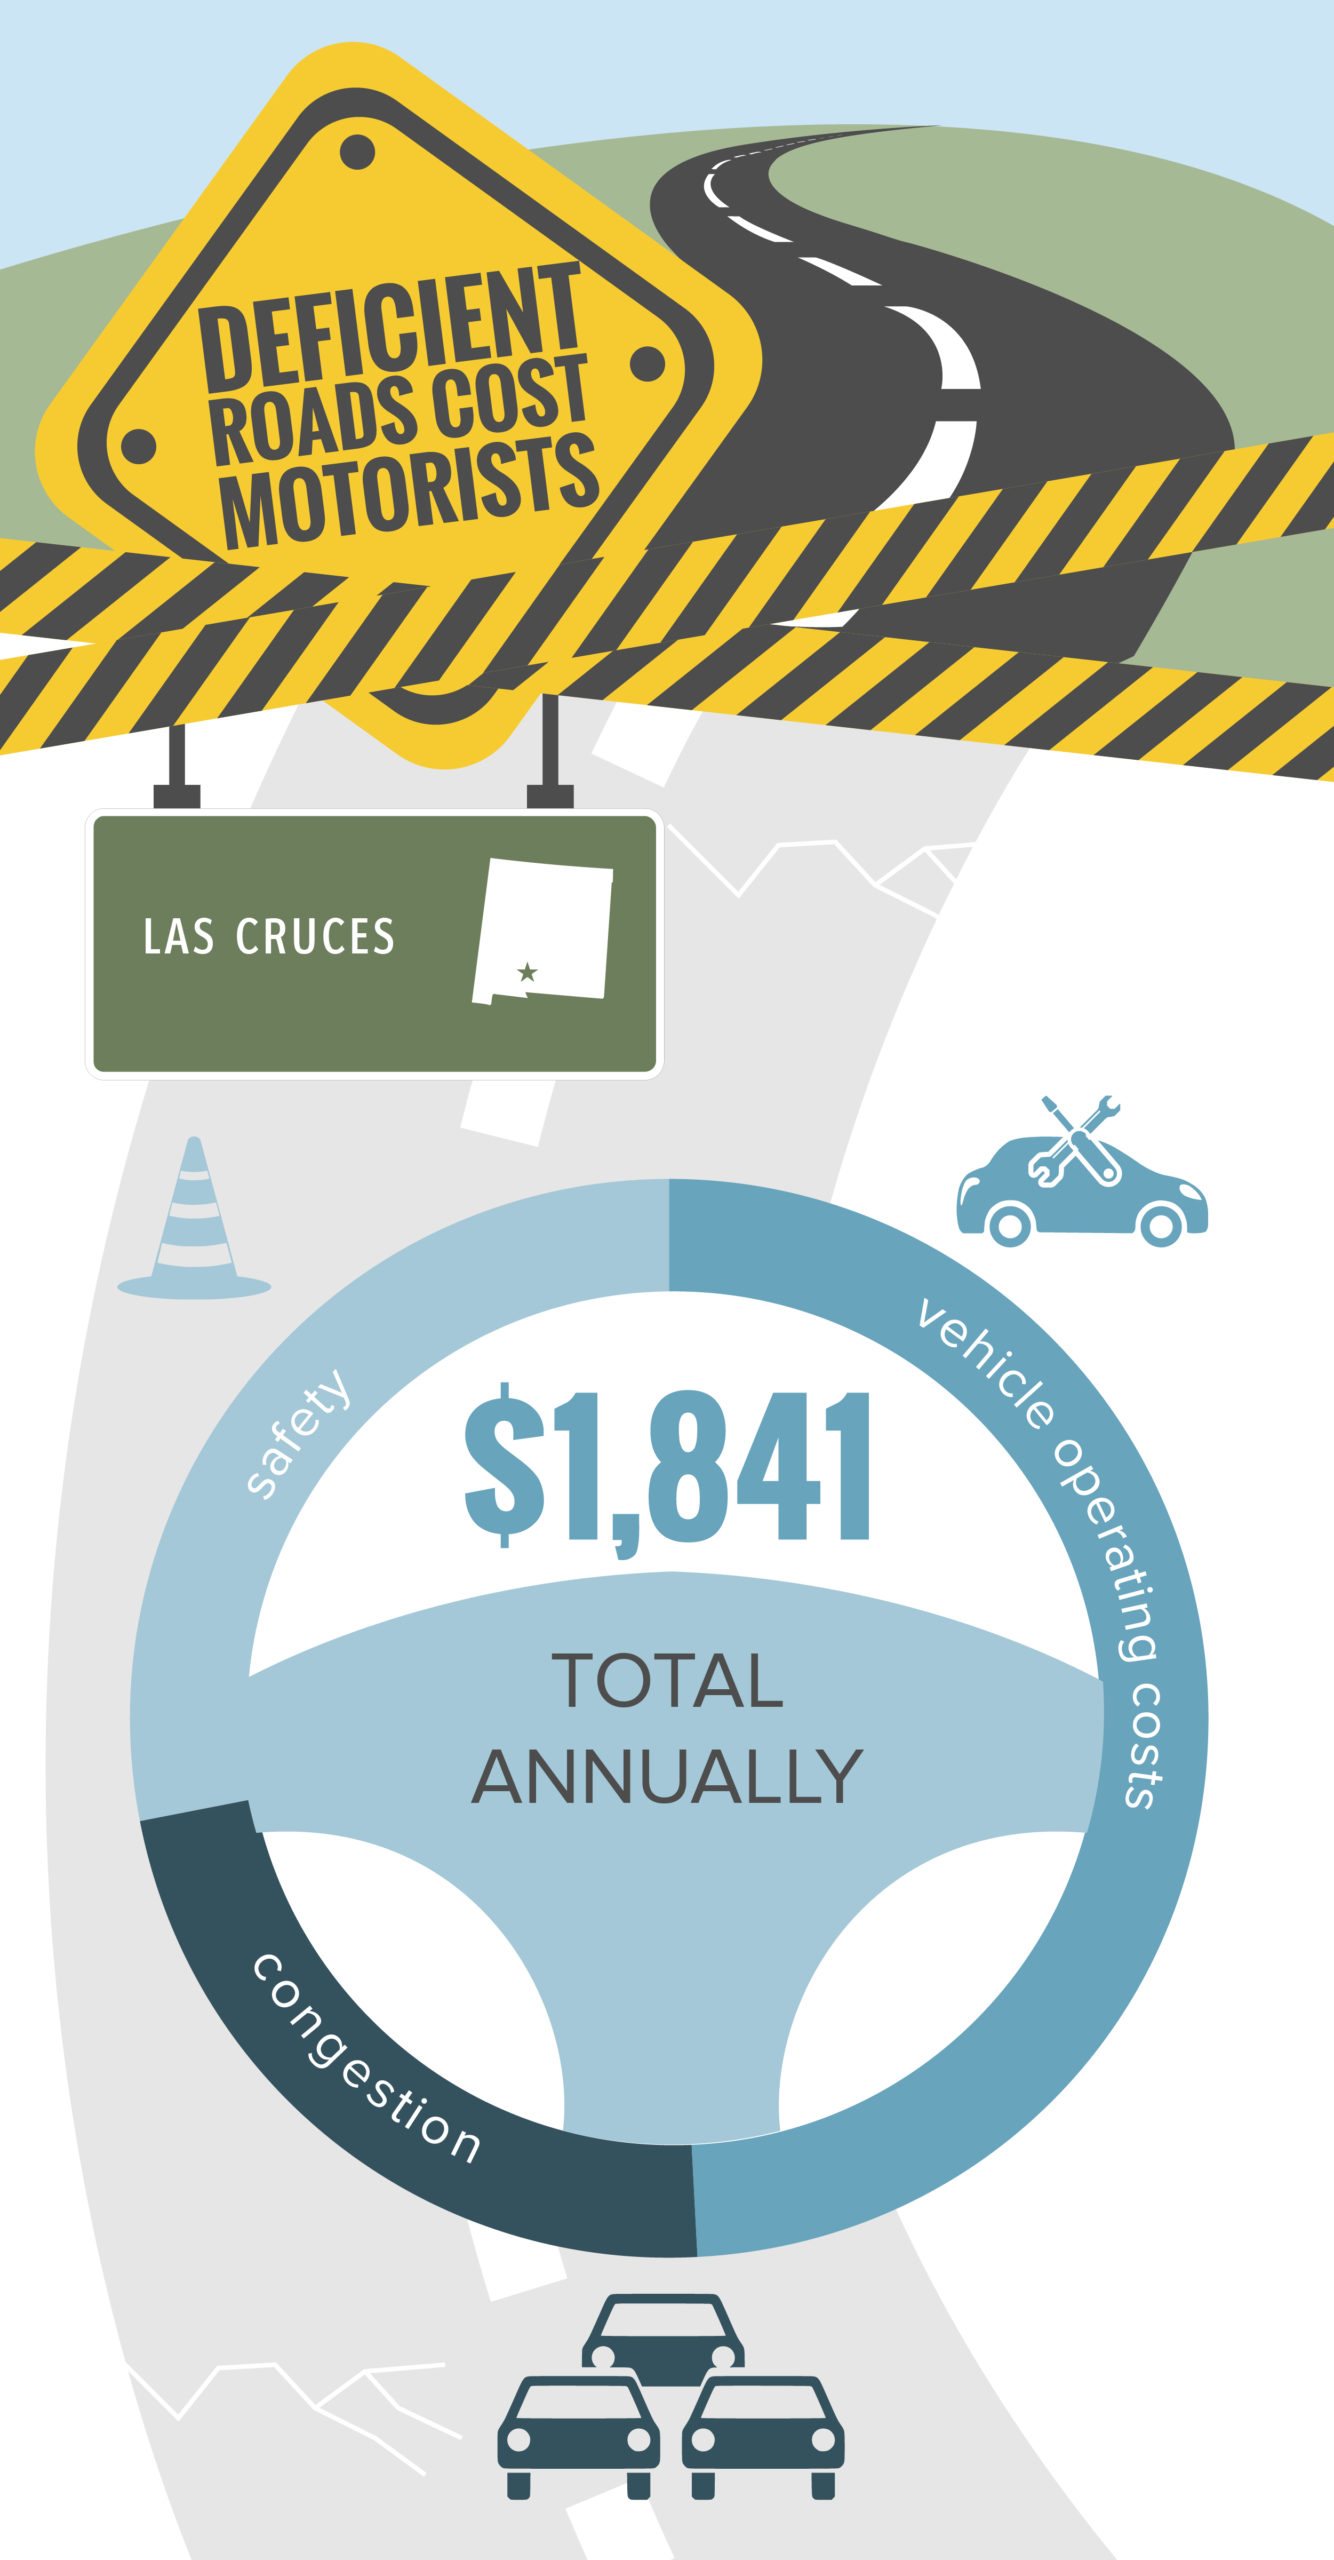 Las Cruces Deficient Roads Cost to Motorists Infographic – January 2022